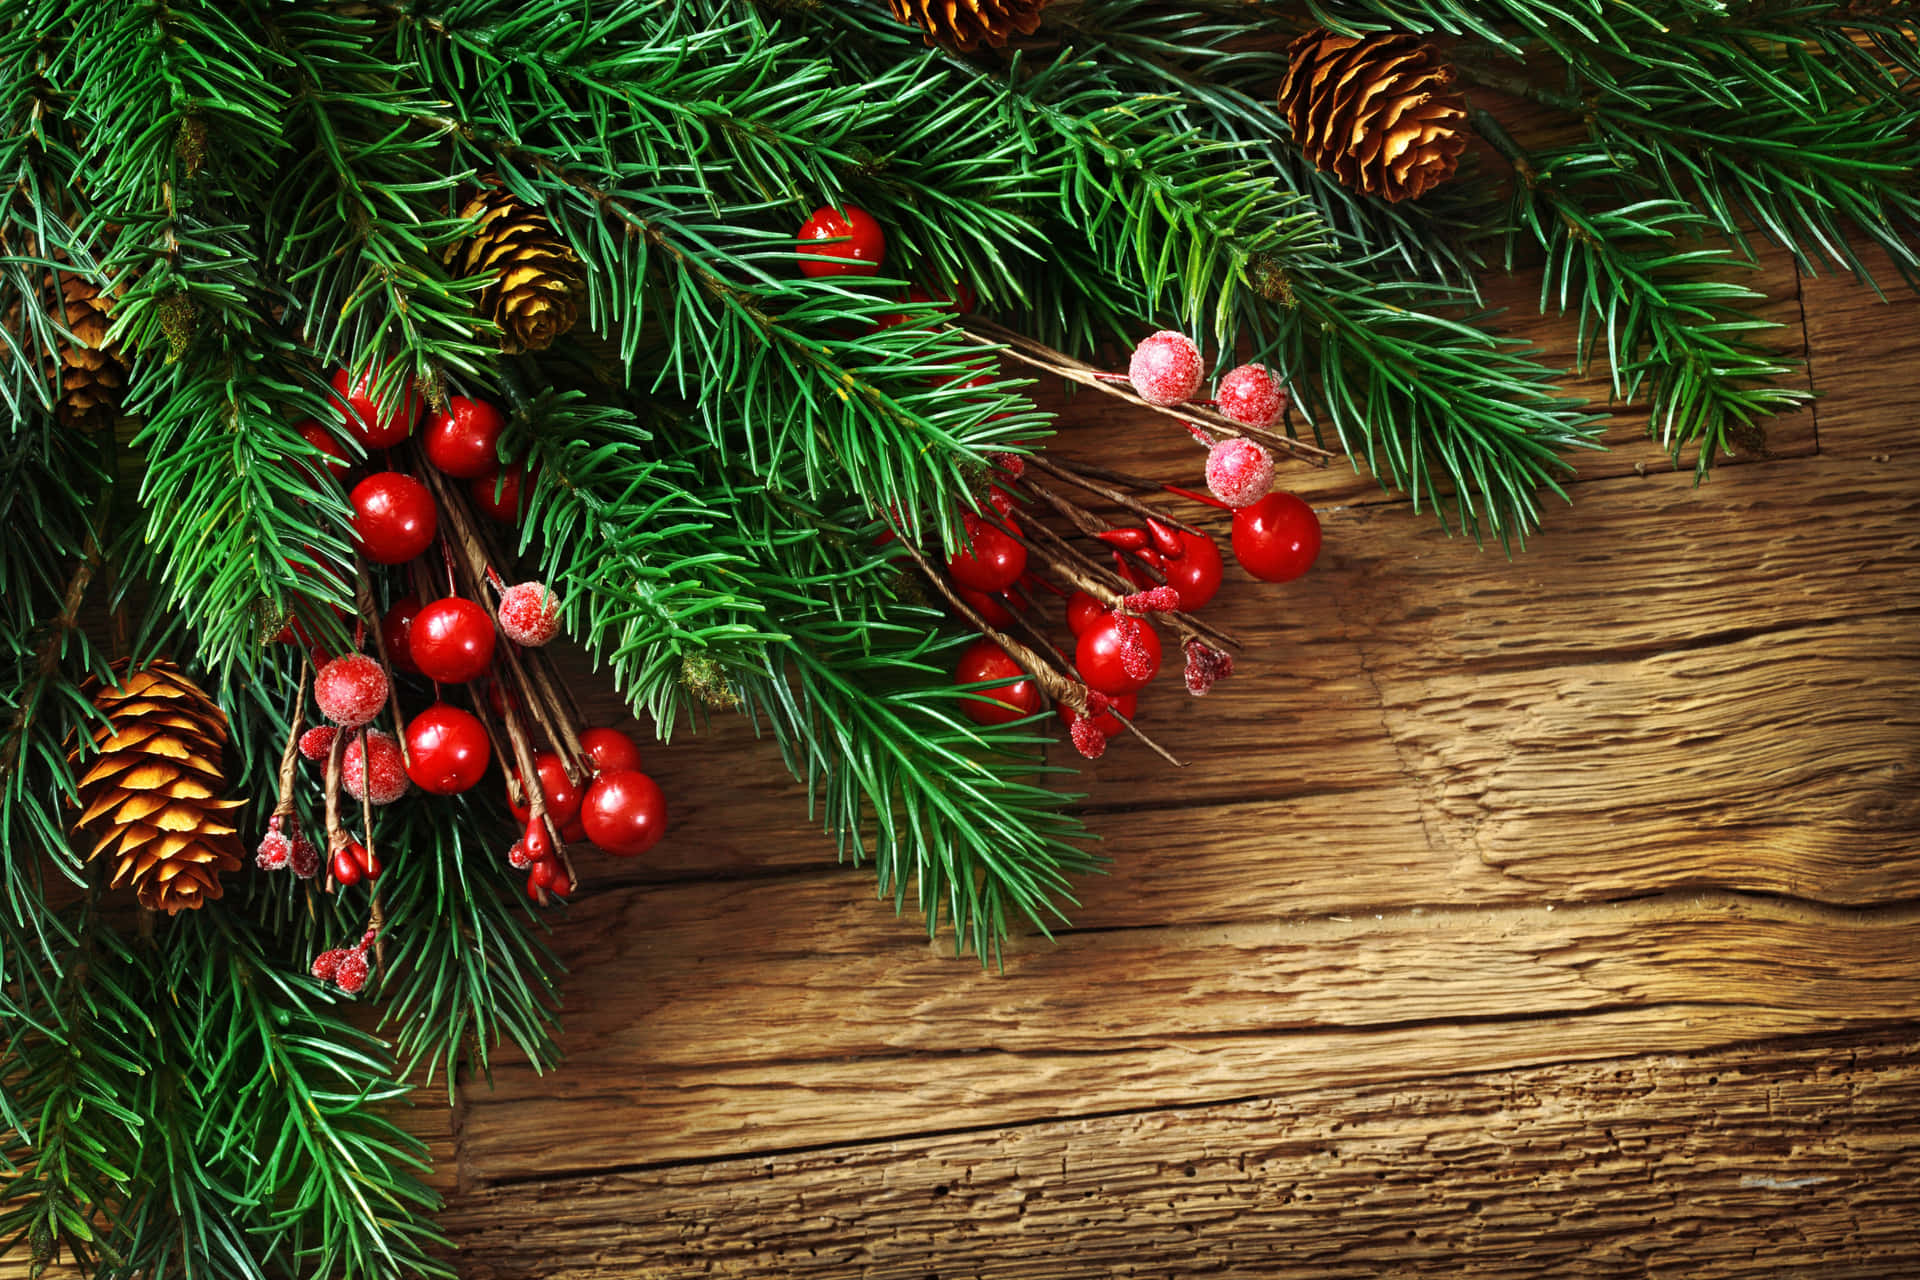 "A holiday scene of bright red and green Christmas decorations" Wallpaper